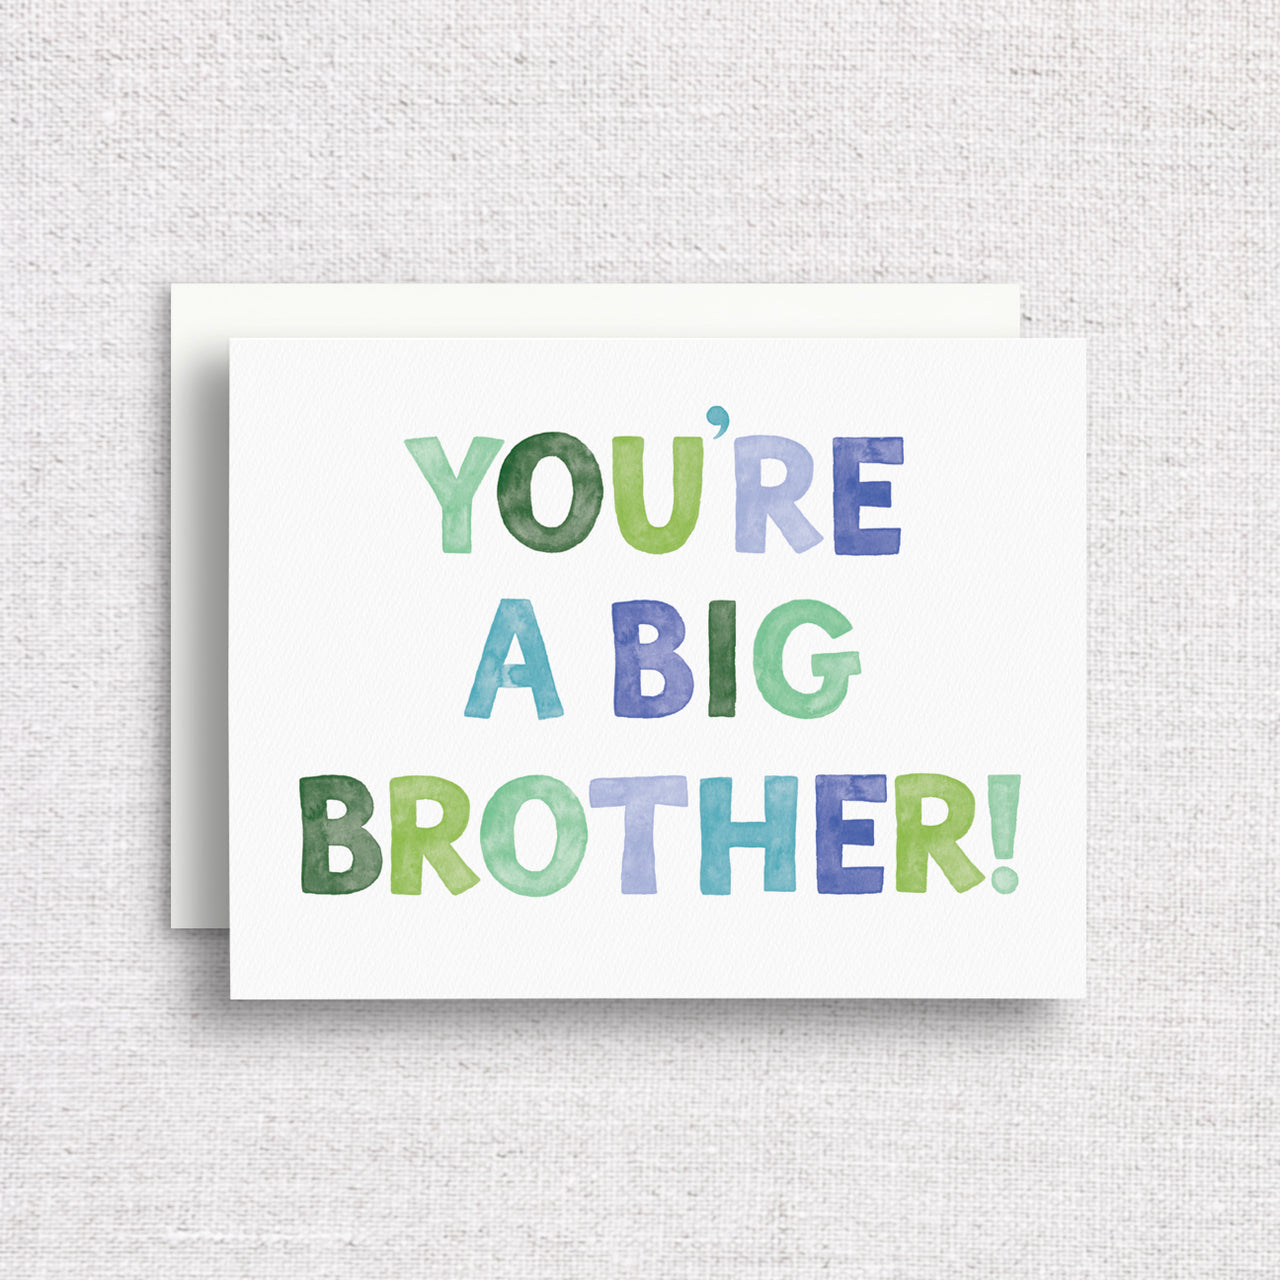 You're a Big Brother Greeting Card by Gert & Co